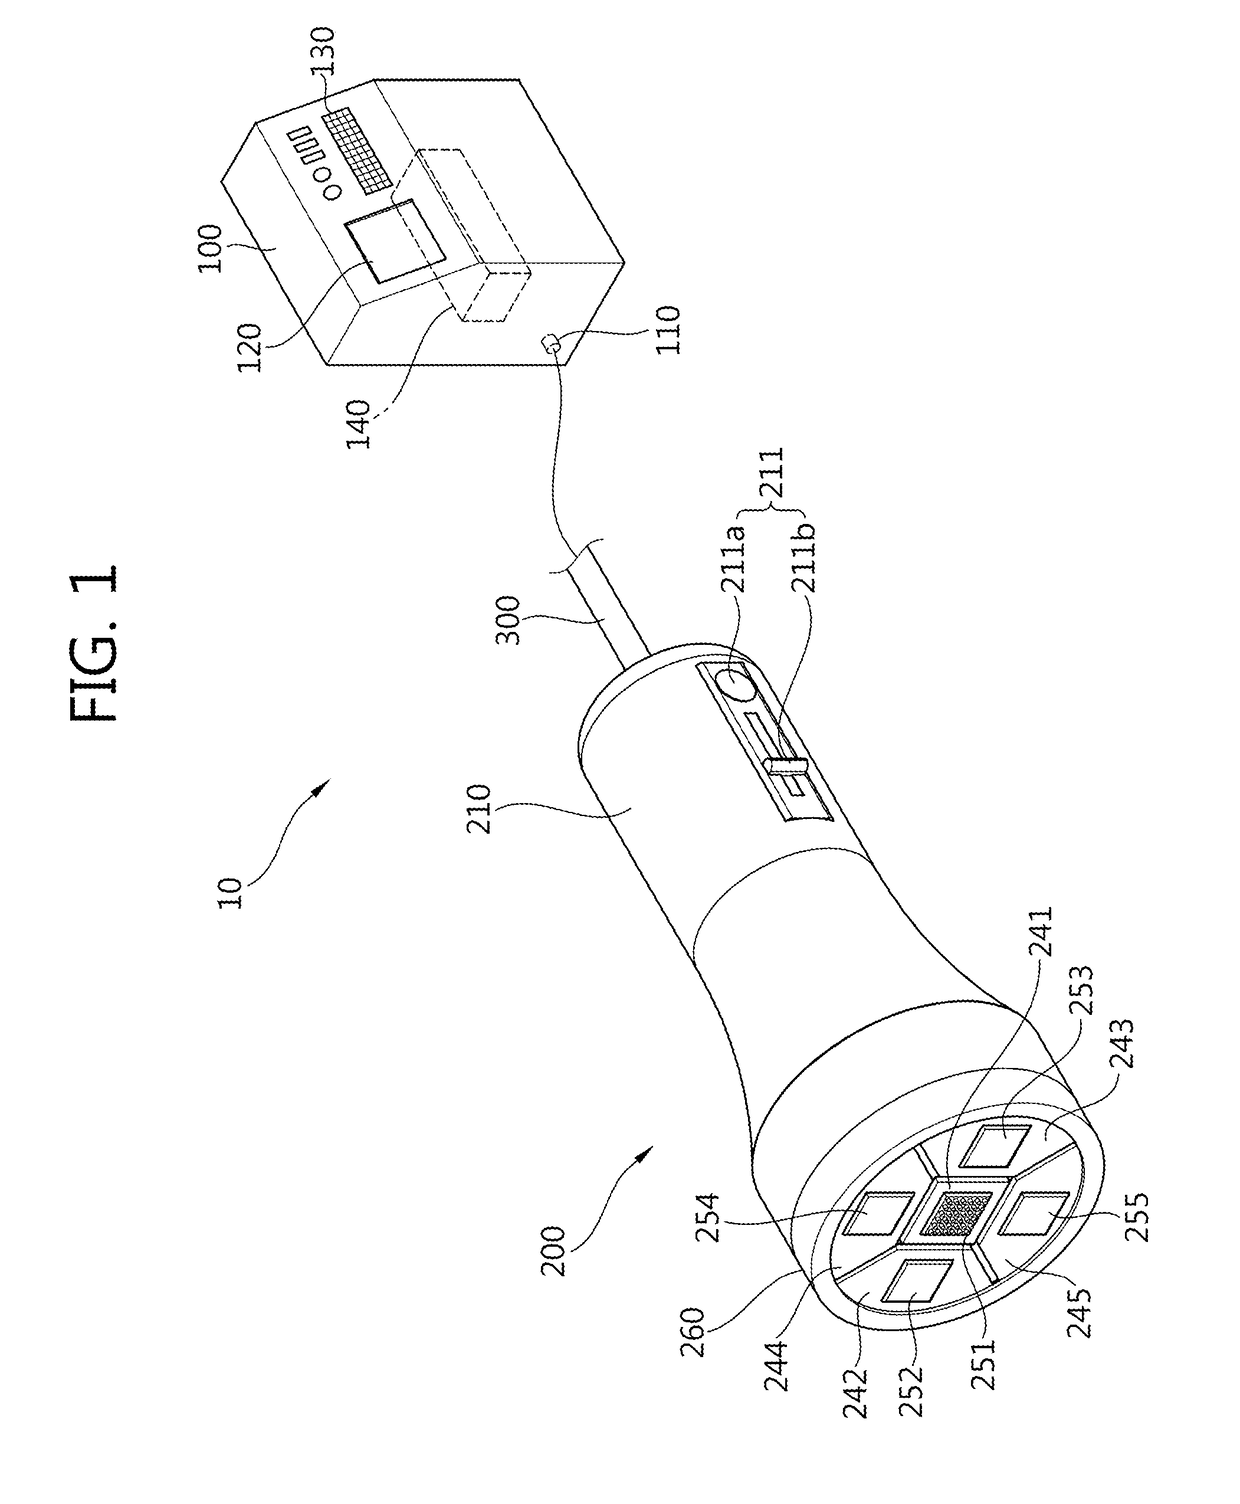 Treatment device using high frequency